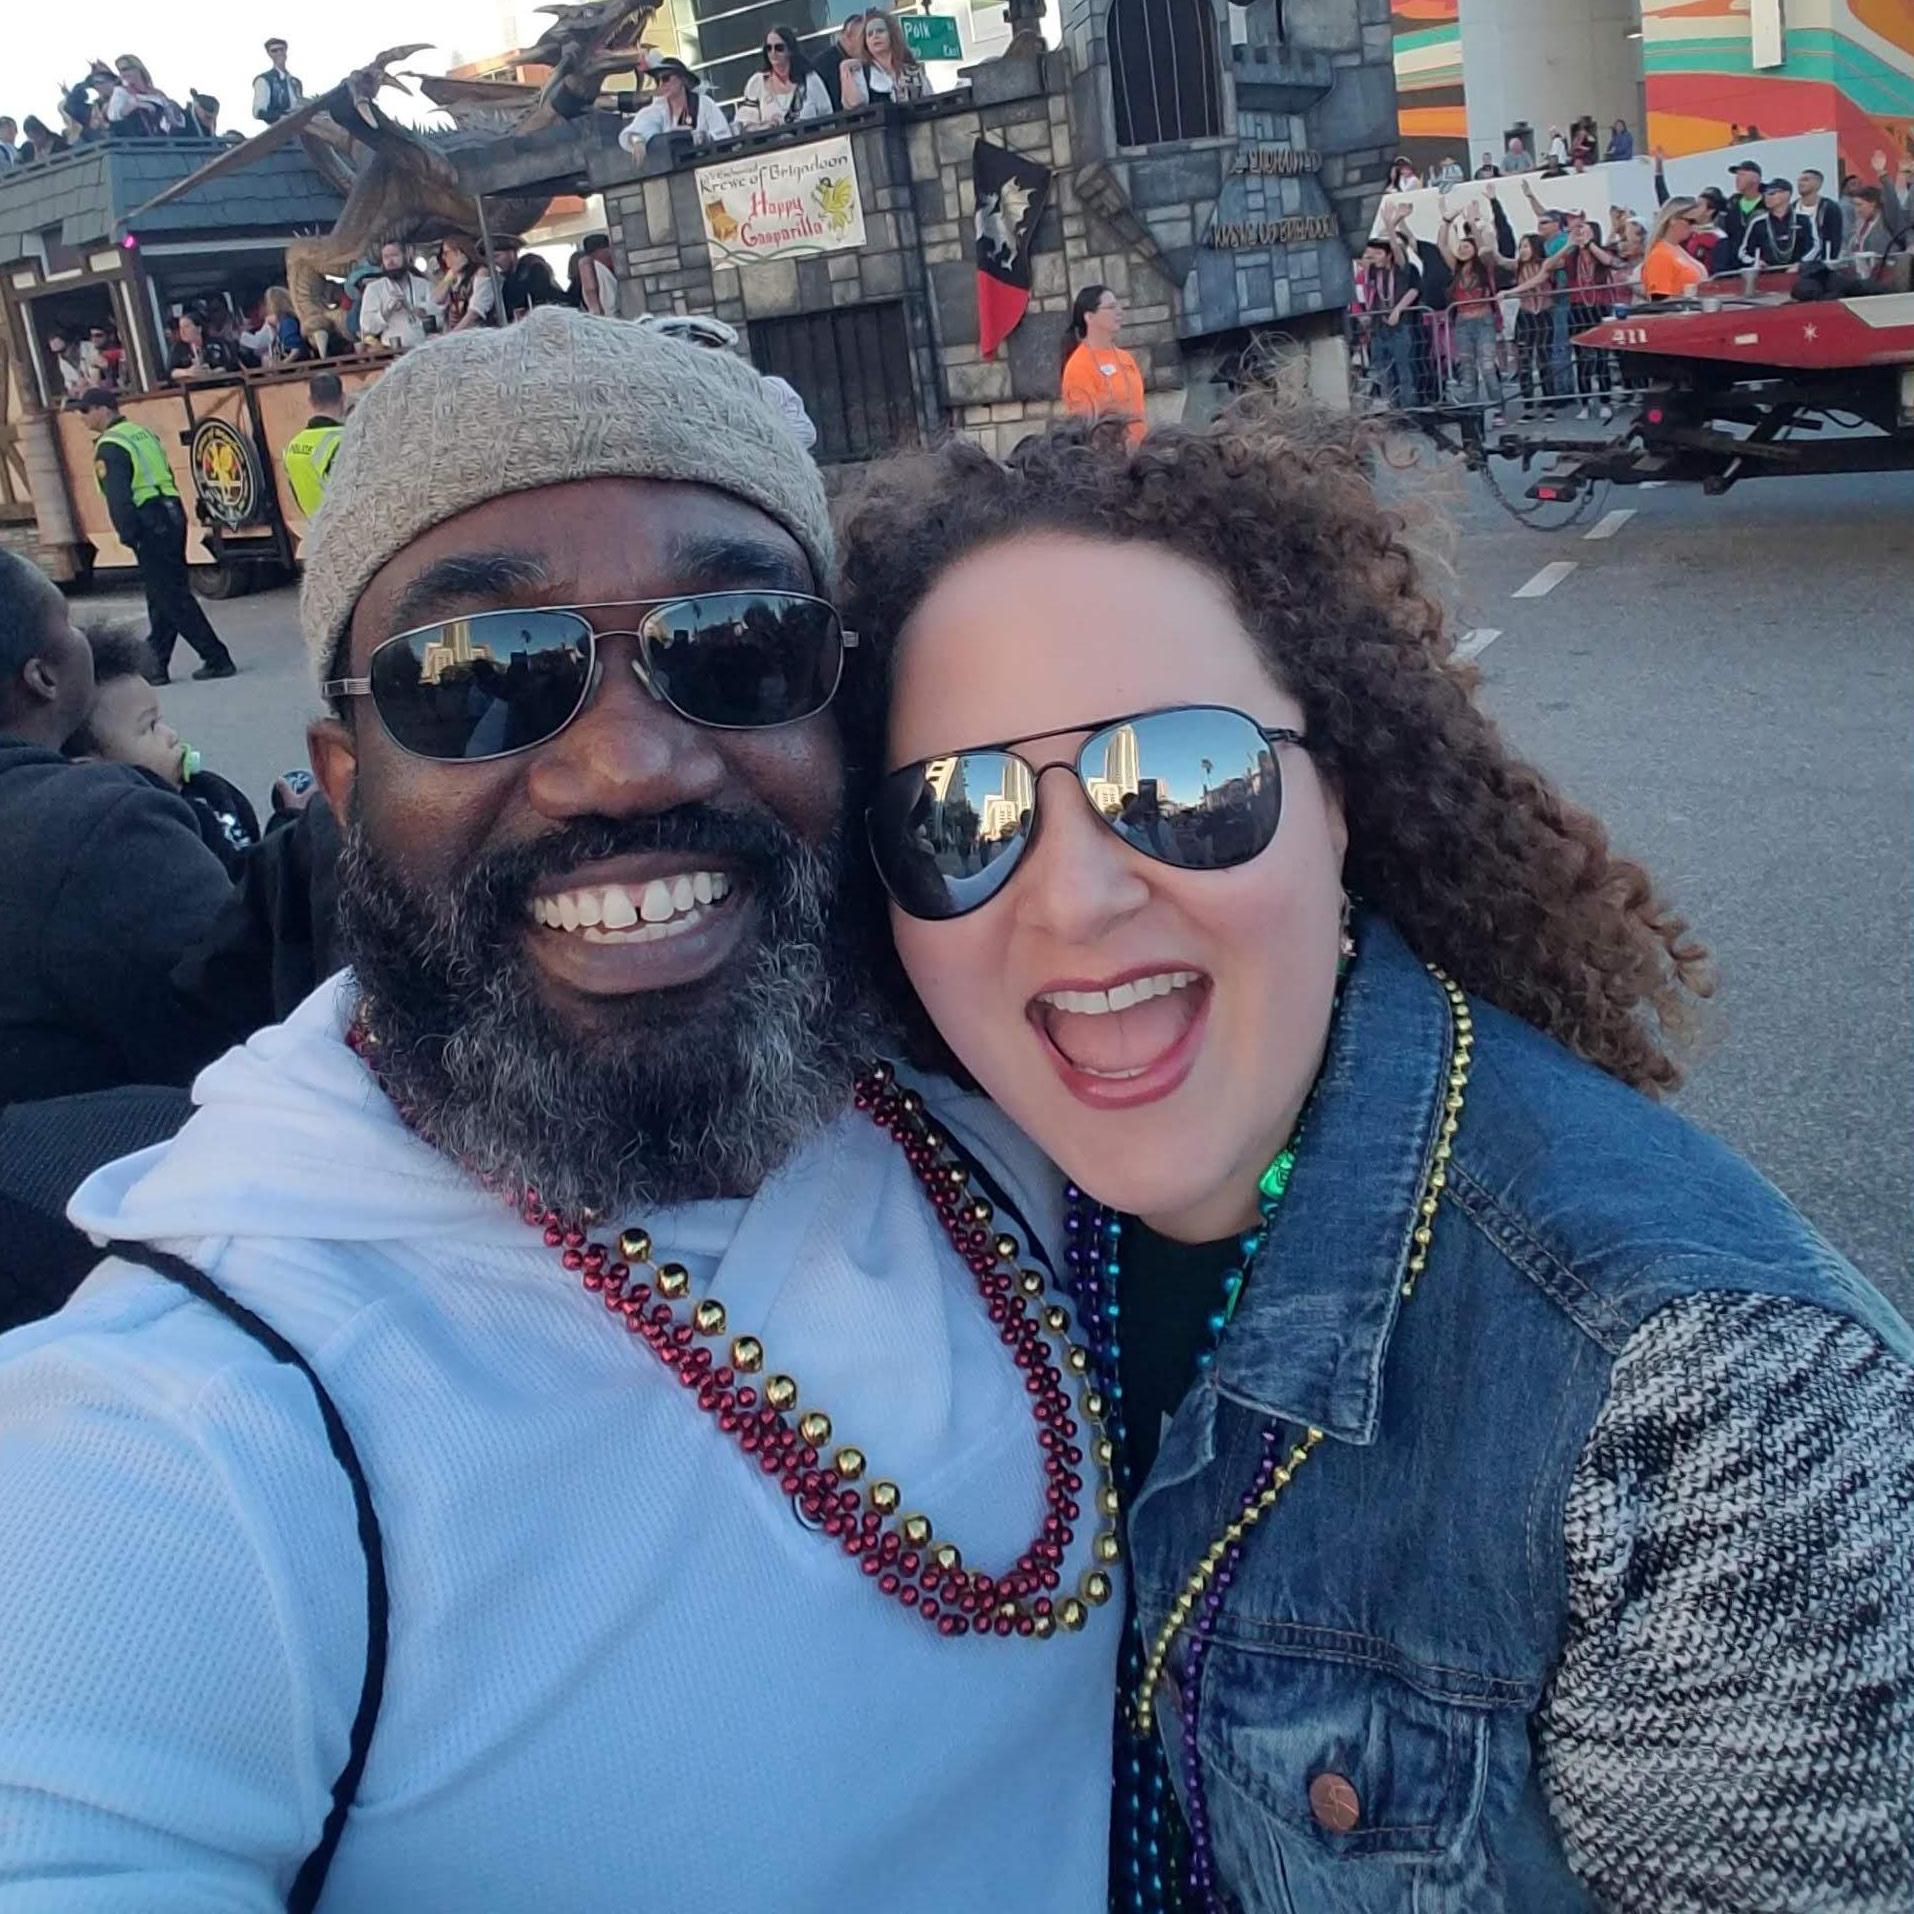 Having a blast at the Gasparilla parade and festival in Tampa!